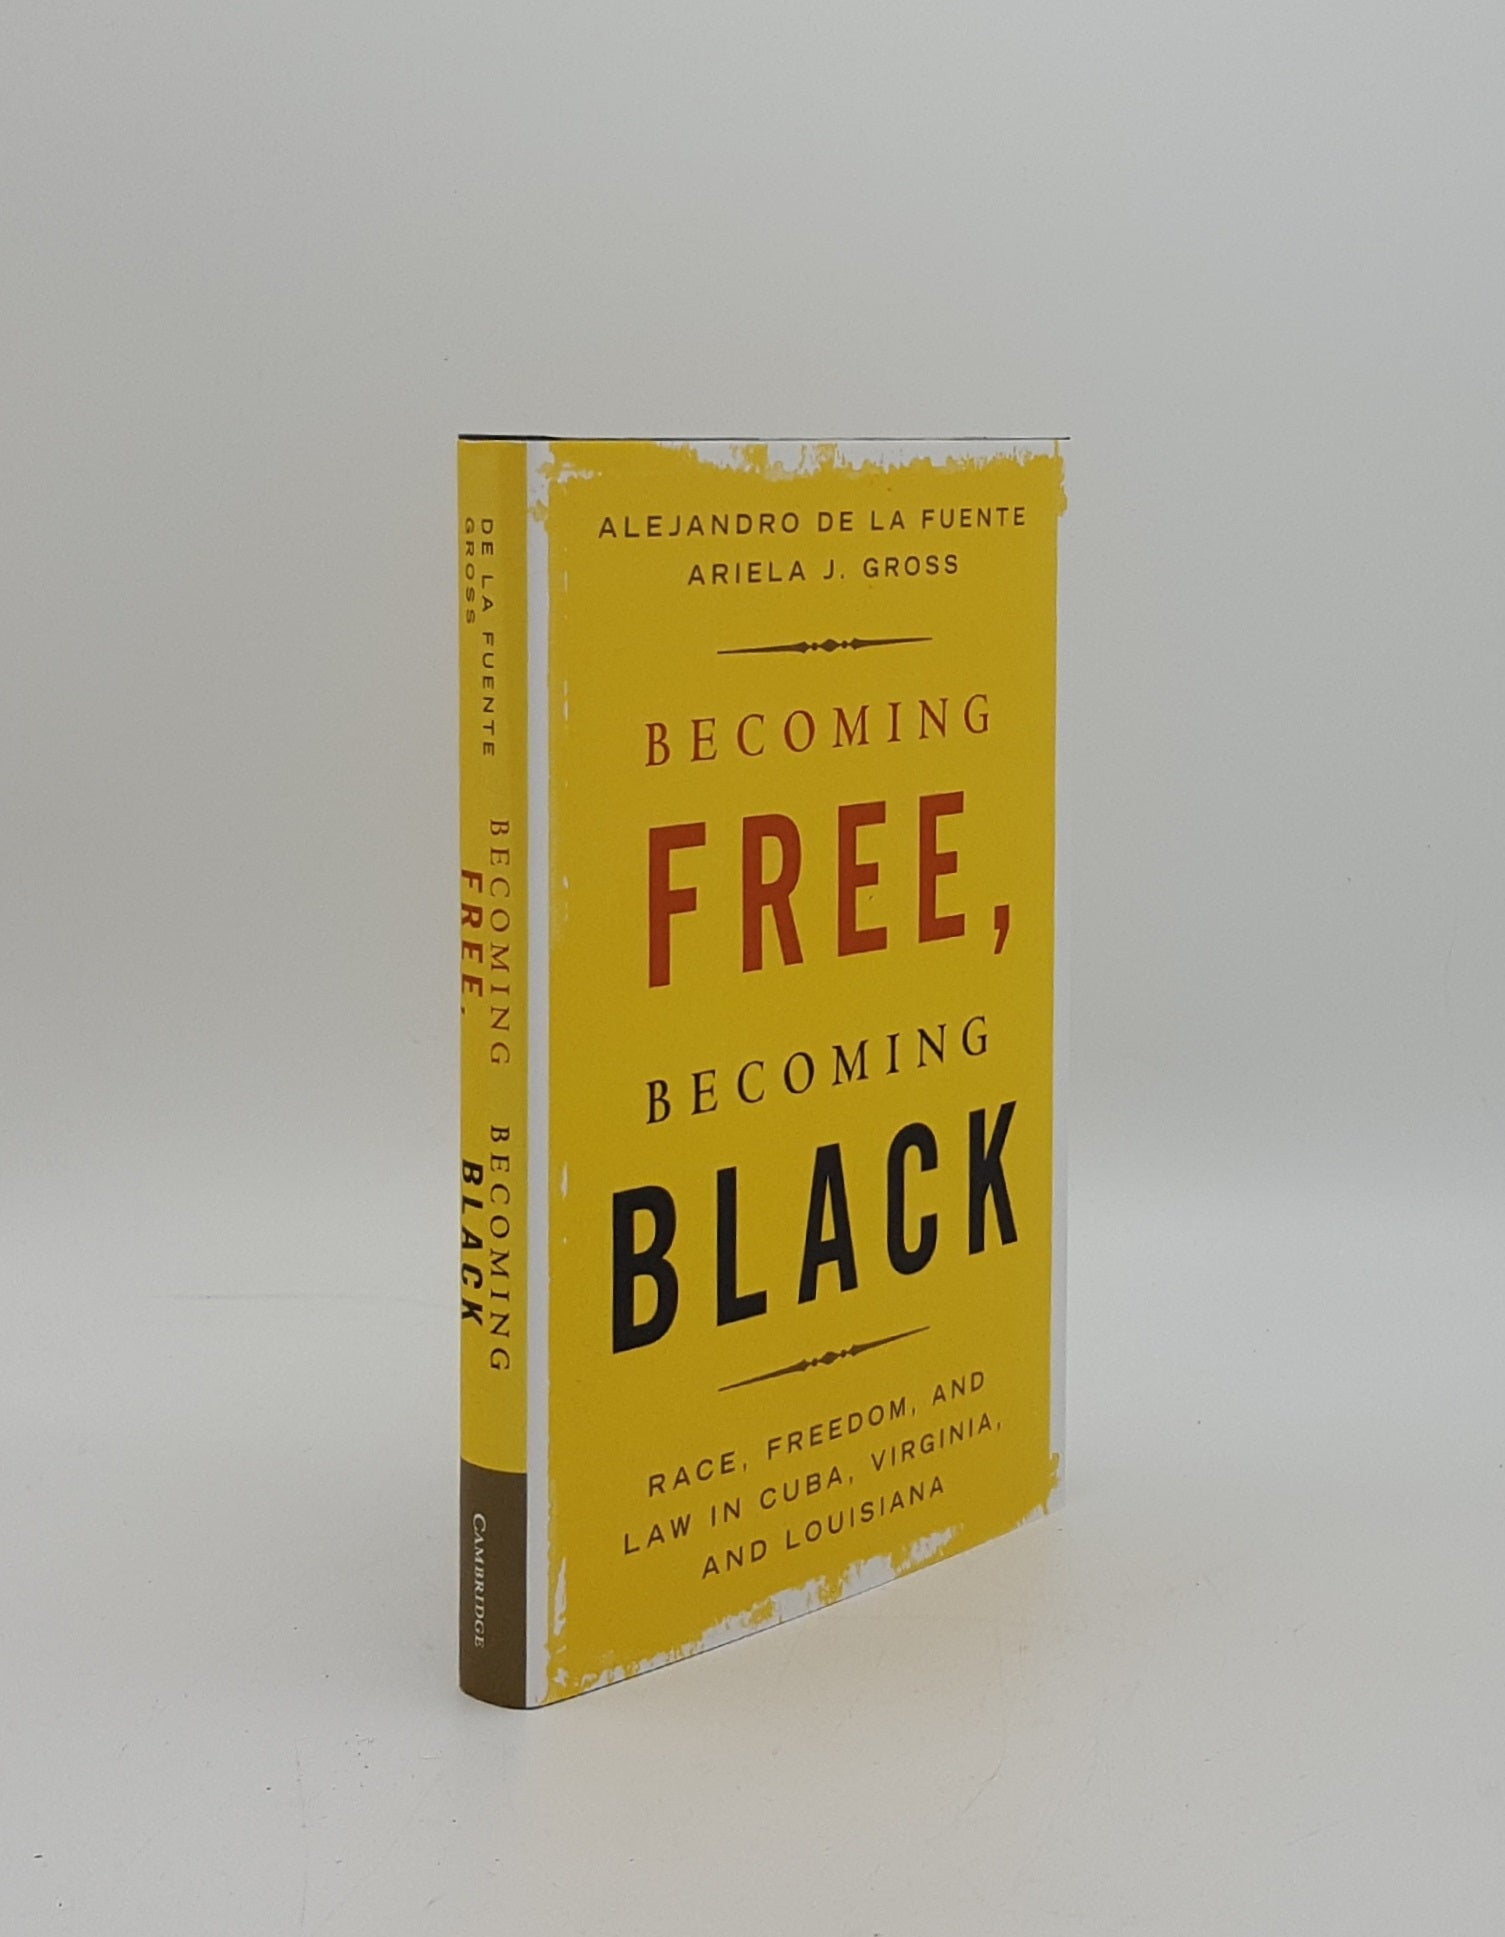 DE LA FUENTE Alejandro, GROSS Ariela J. - Becoming Free Becoming Black Race Freedom and Law in Cuba Virginia and Louisiana (Studies in Legal History)